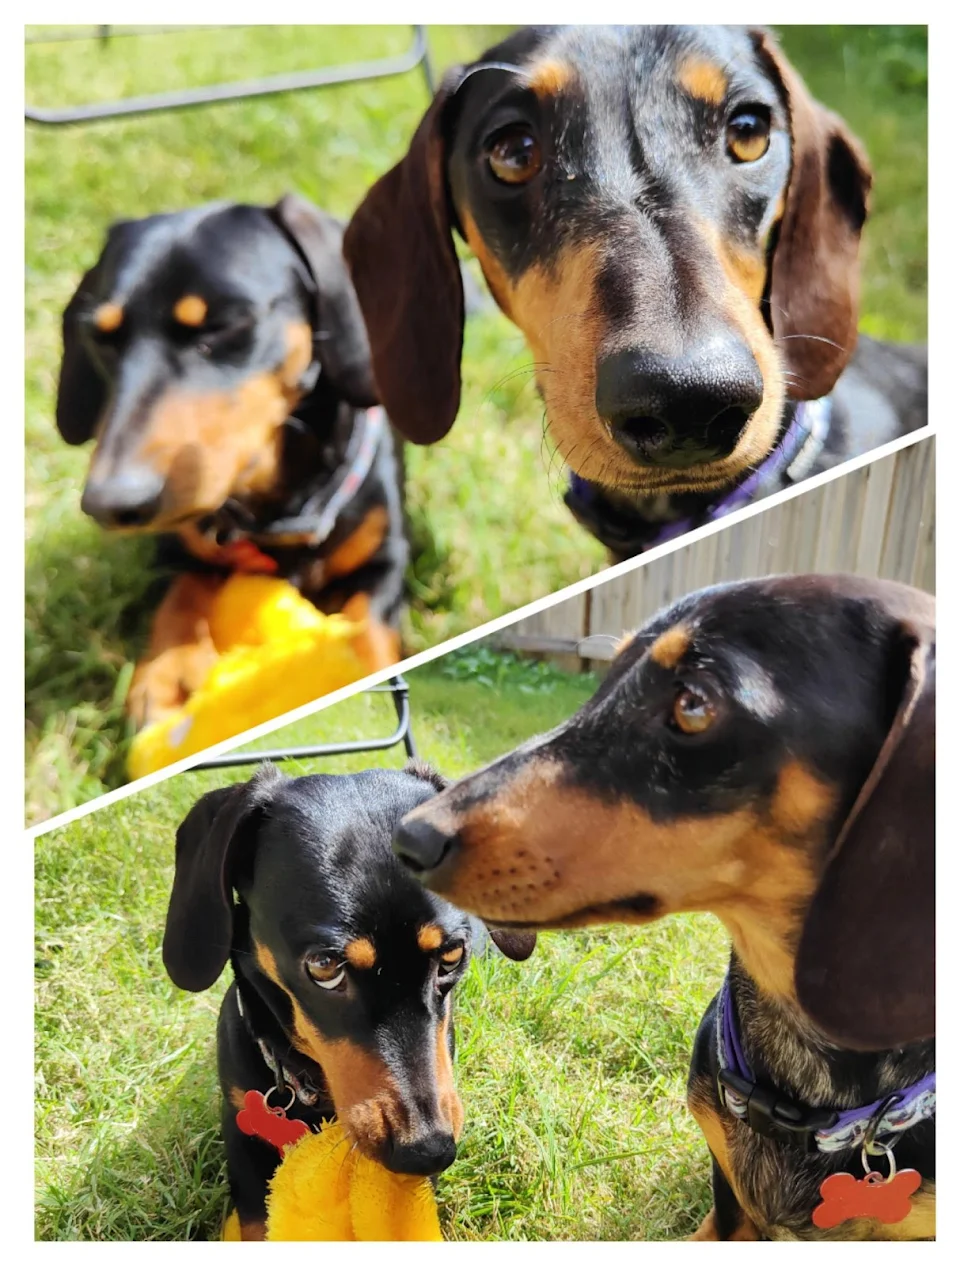 My sis adopted 1 year old Dachshund sisters from a rescue. Meet Winnie and Lucy.